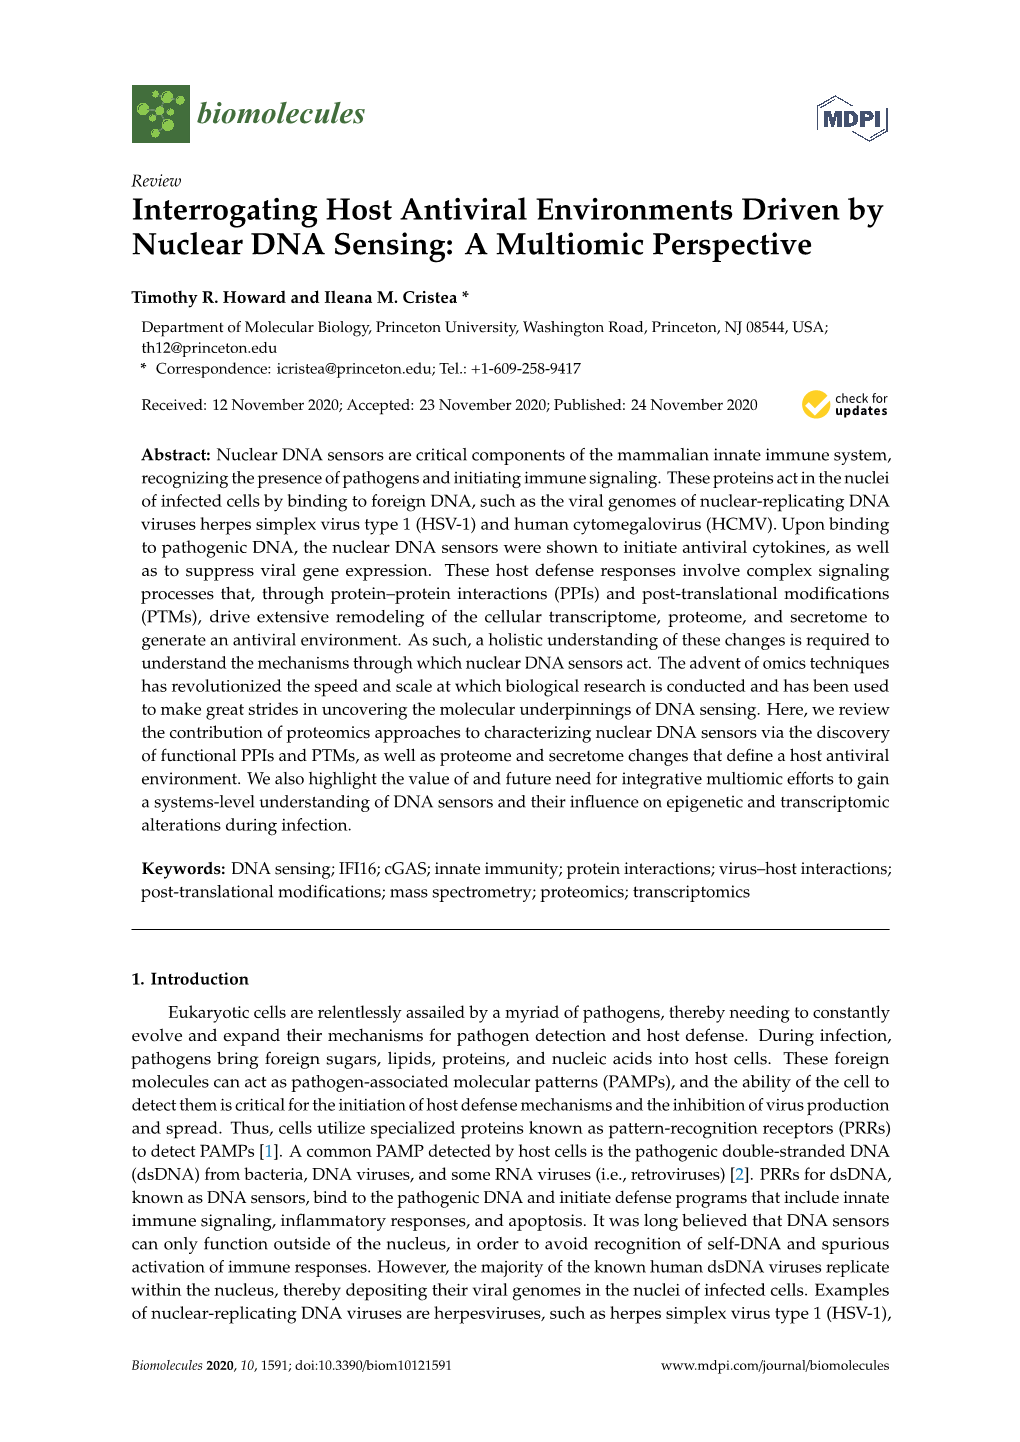 Interrogating Host Antiviral Environments Driven by Nuclear DNA Sensing: a Multiomic Perspective